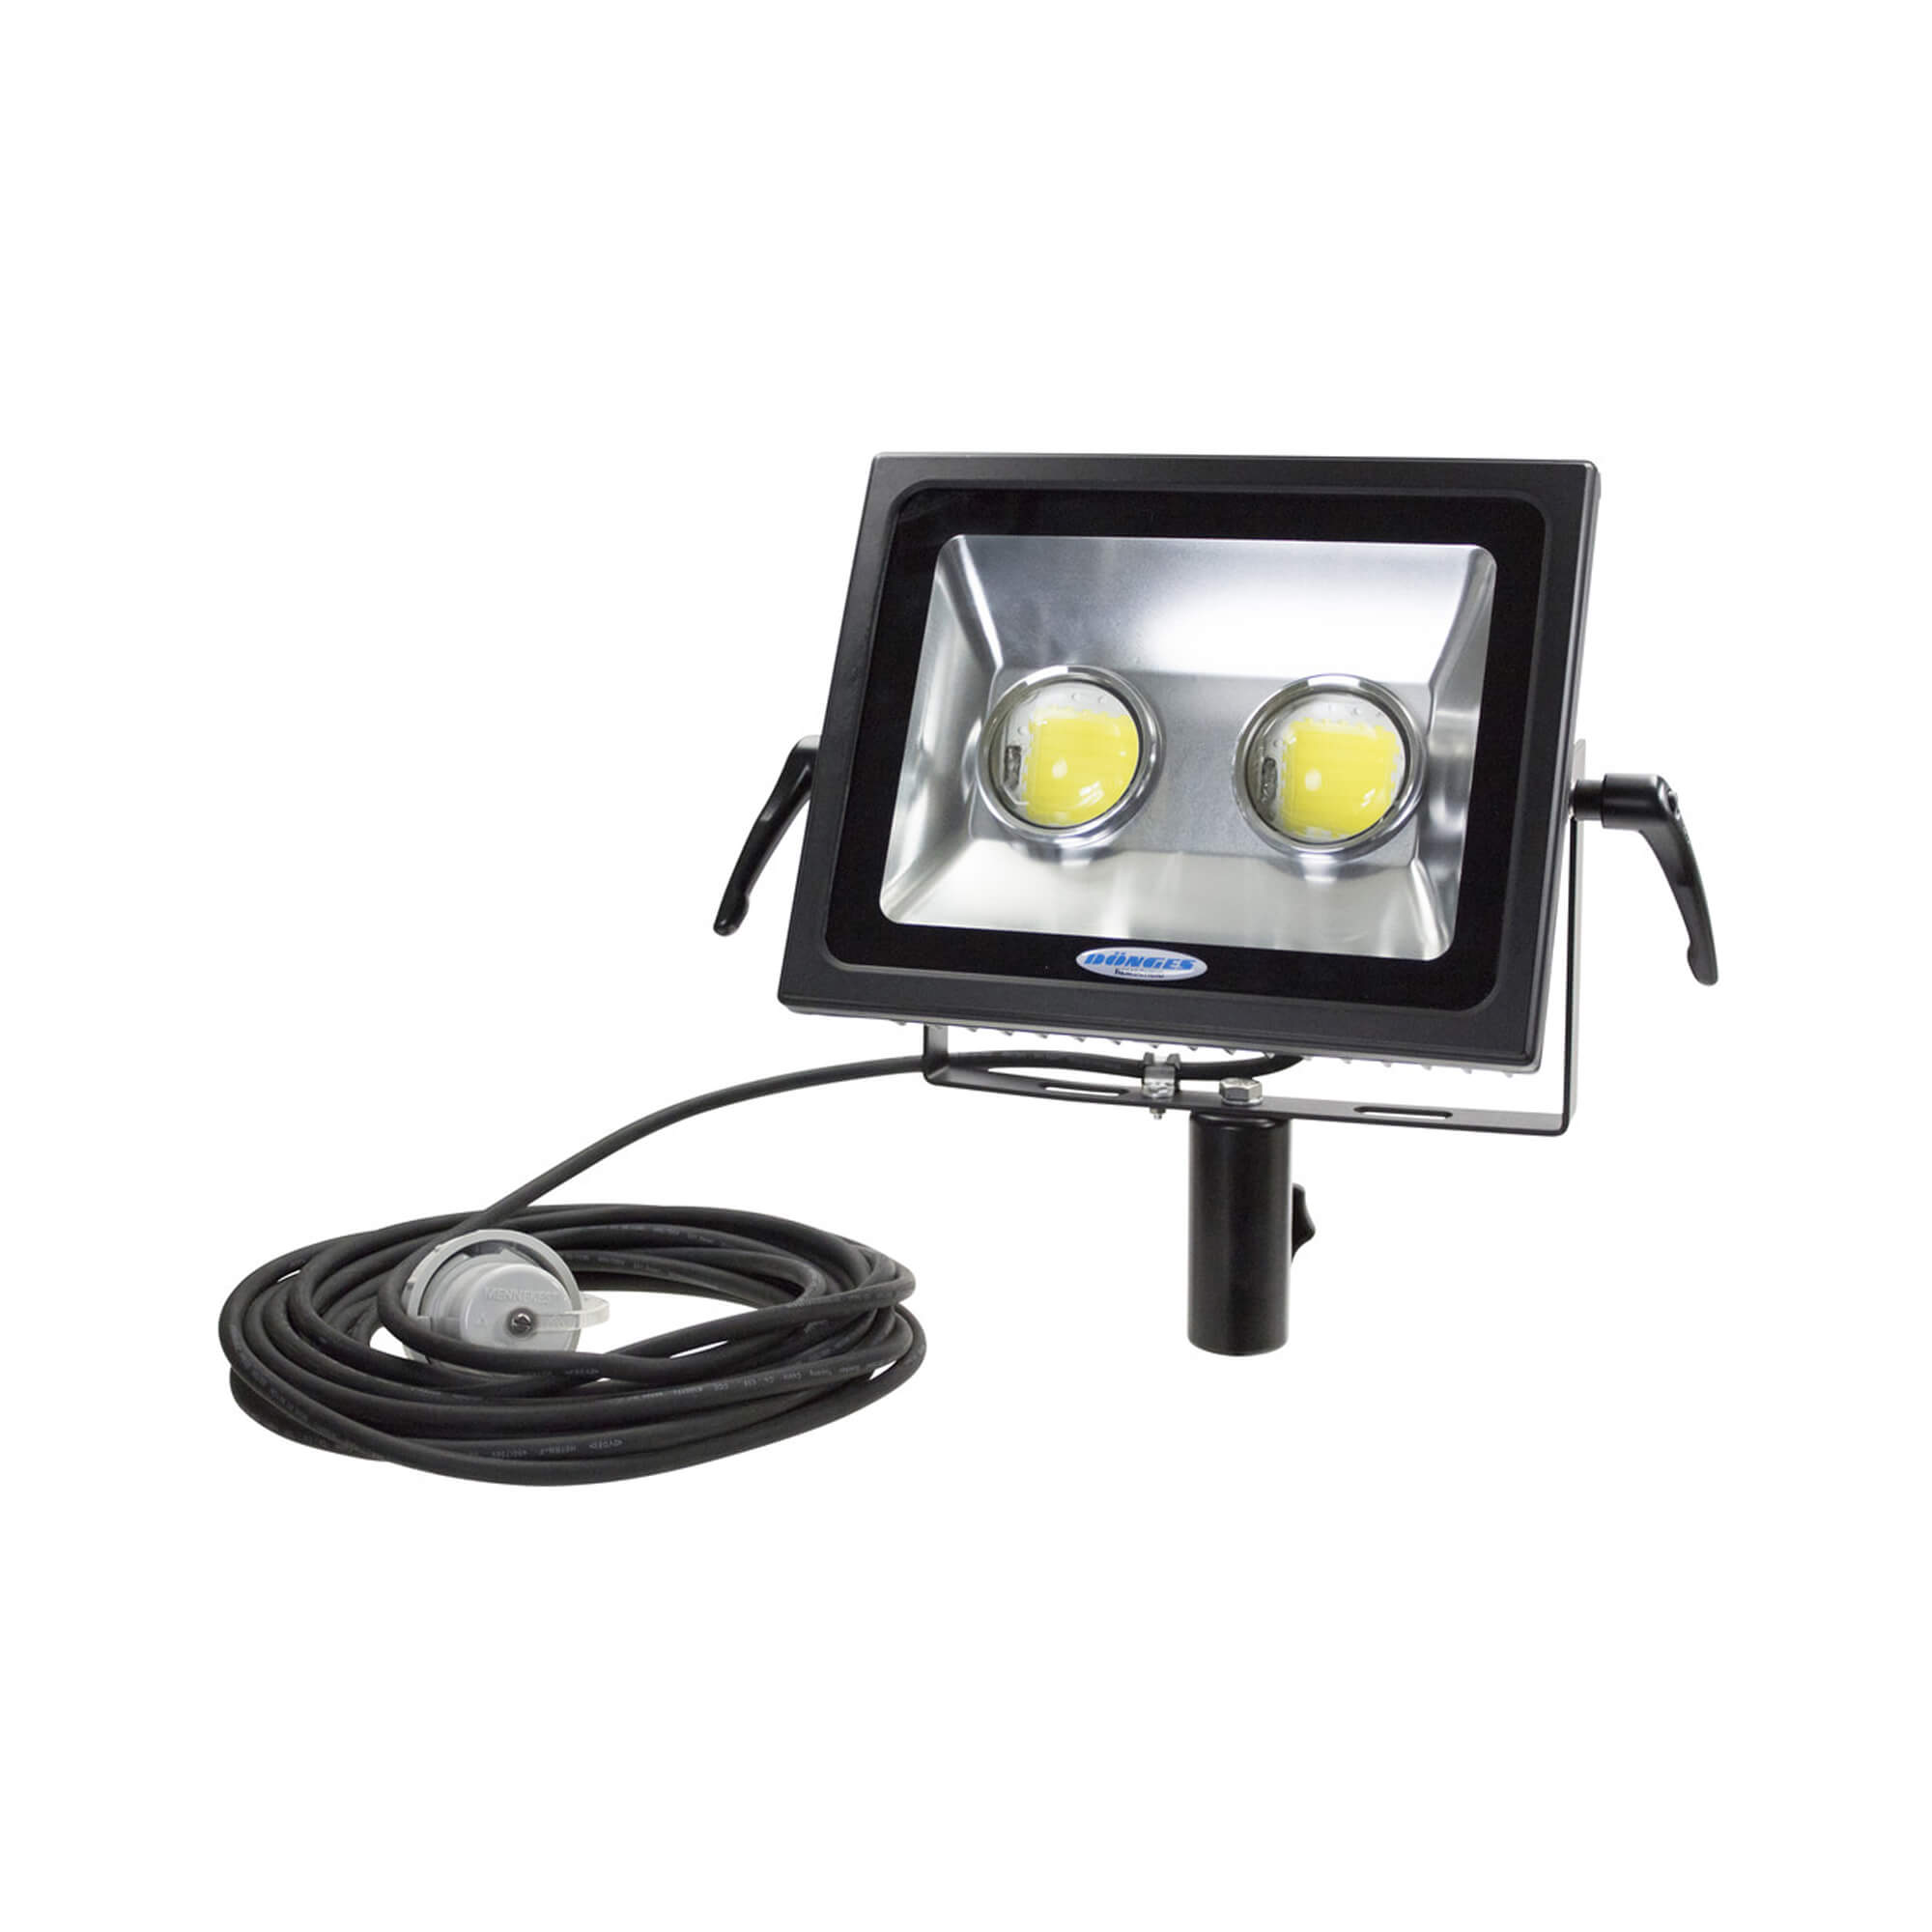 LED Area Light Donges 100 W, 10,000 lm